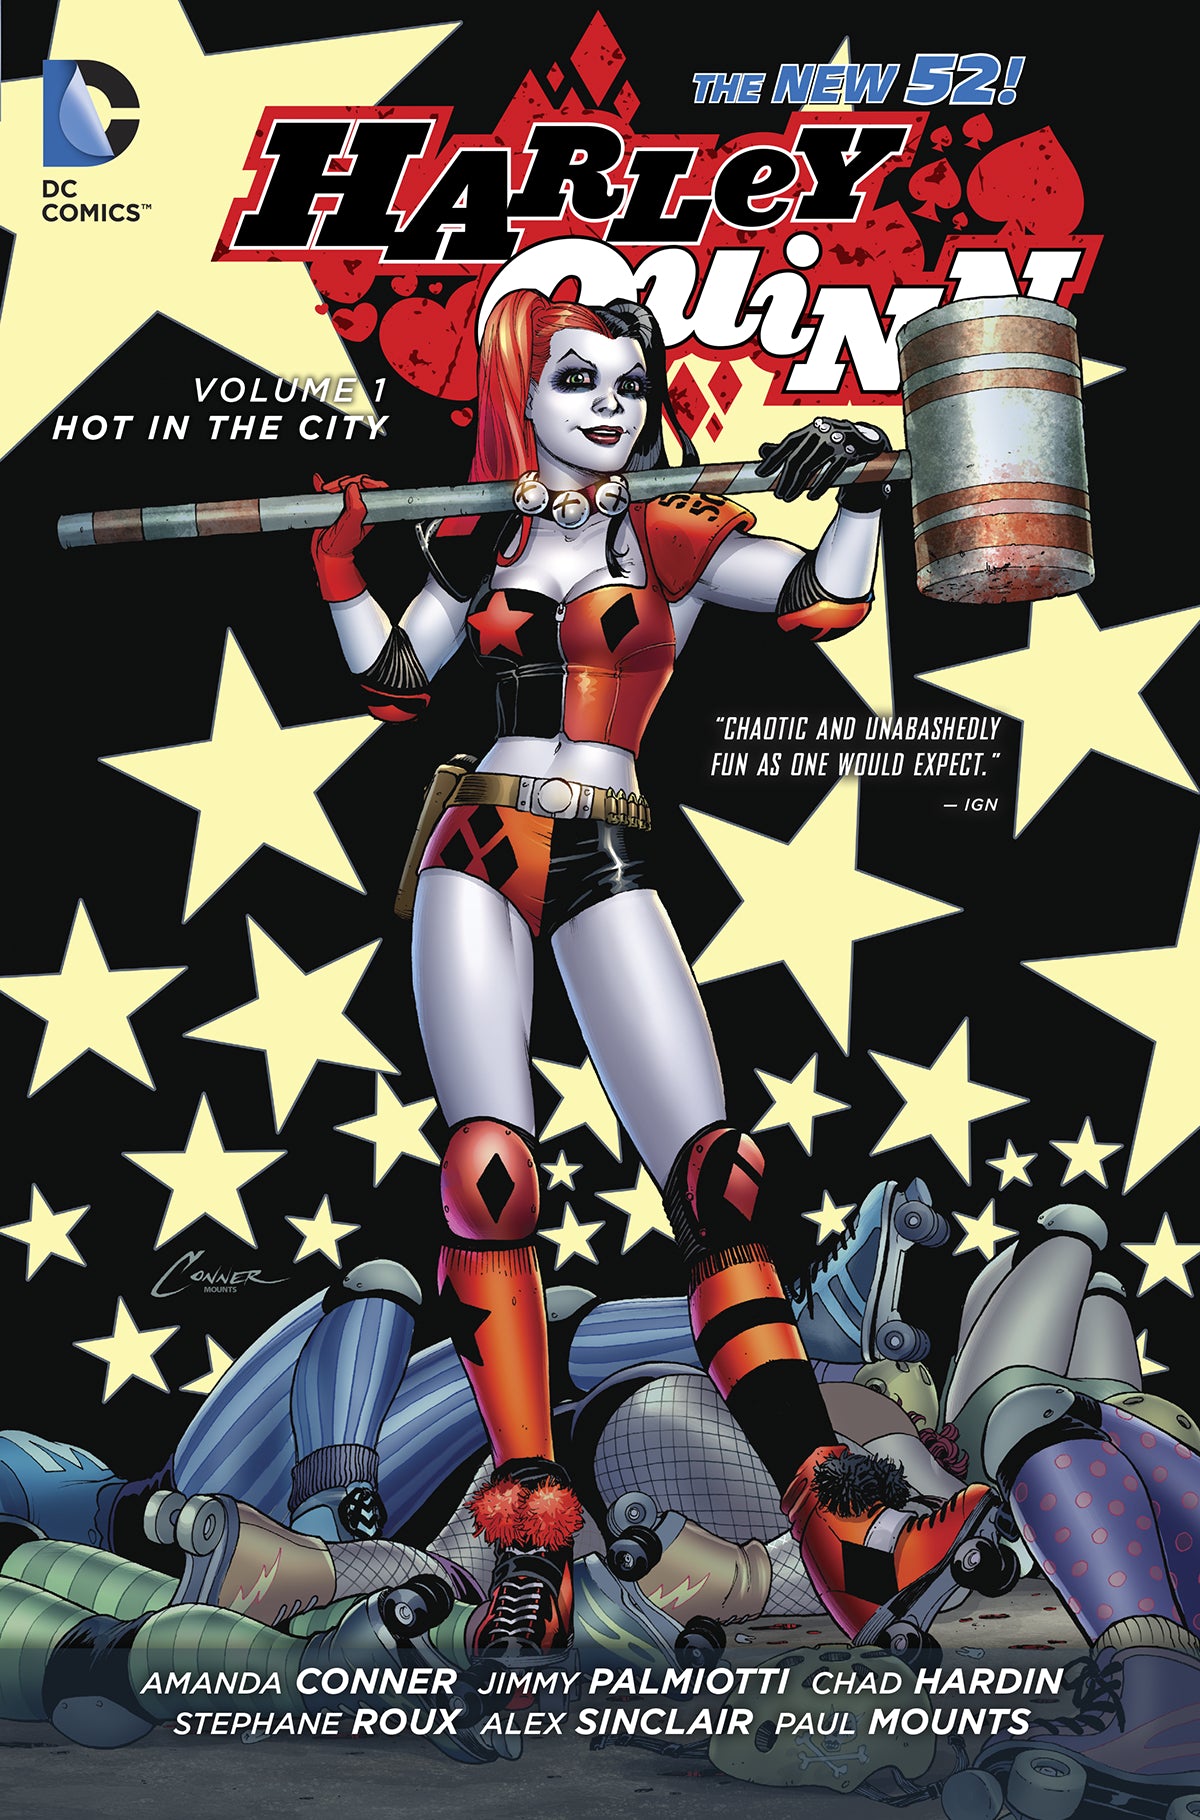 HARLEY QUINN TP VOL 01 HOT IN THE CITY (N52) | Game Master's Emporium (The New GME)